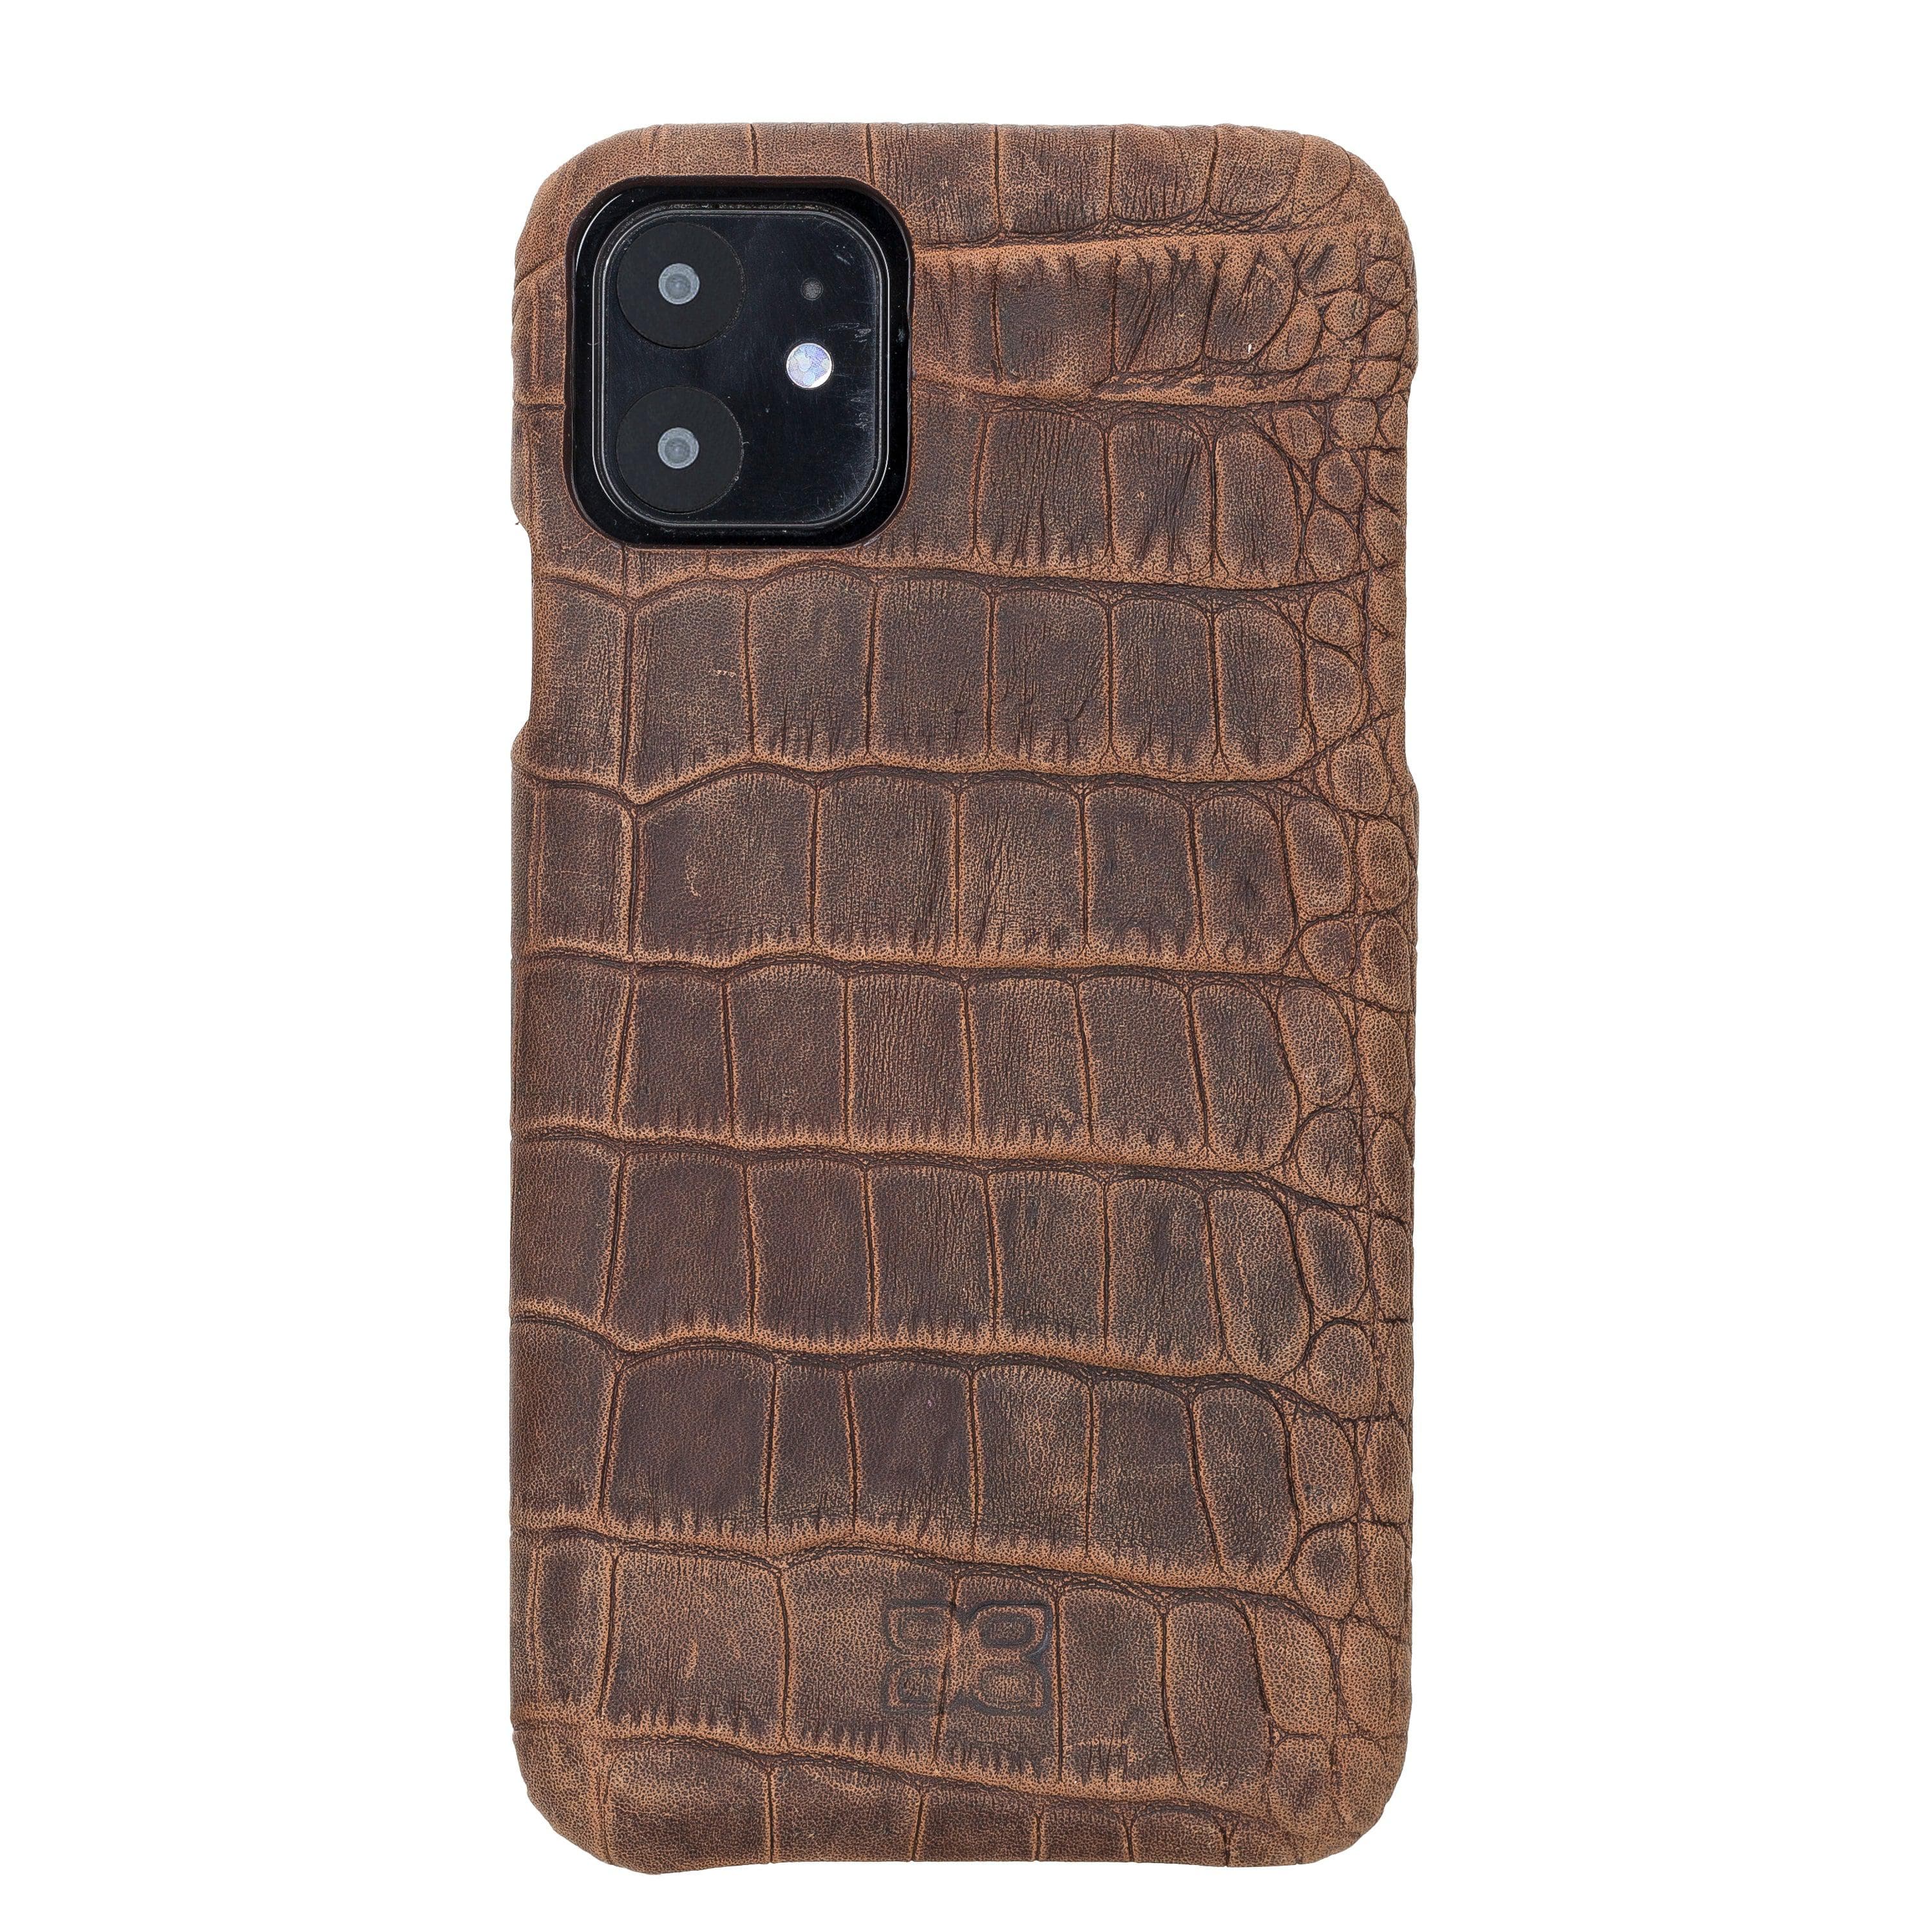 Bouletta Fully Leather Back Cover for Apple iPhone 11 Series İPhone 11 / Dragon Brown Bouletta LTD